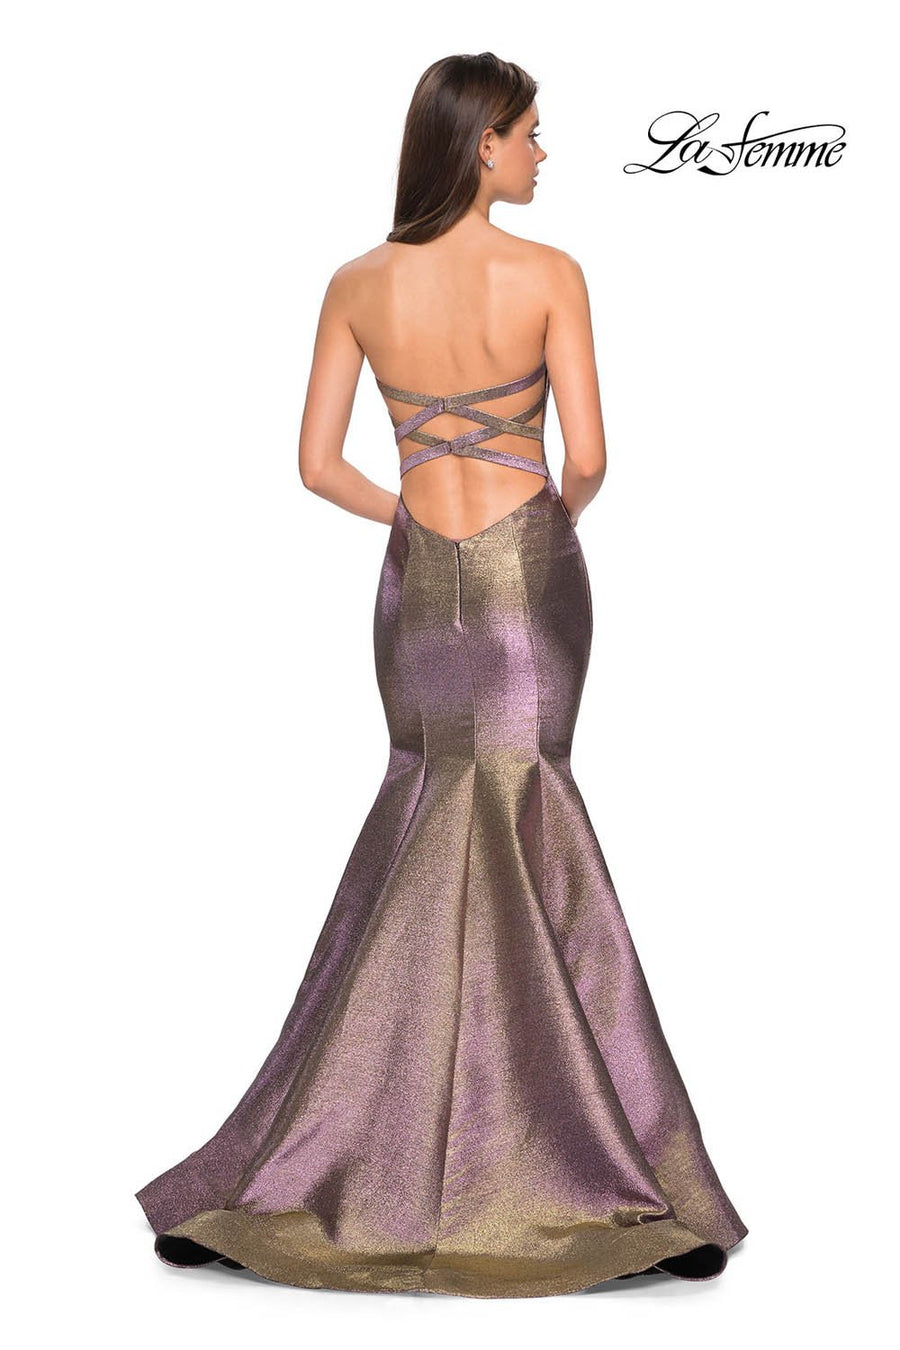 La Femme 27638 prom dress images.  La Femme 27638 is available in these colors: Purple Gold.